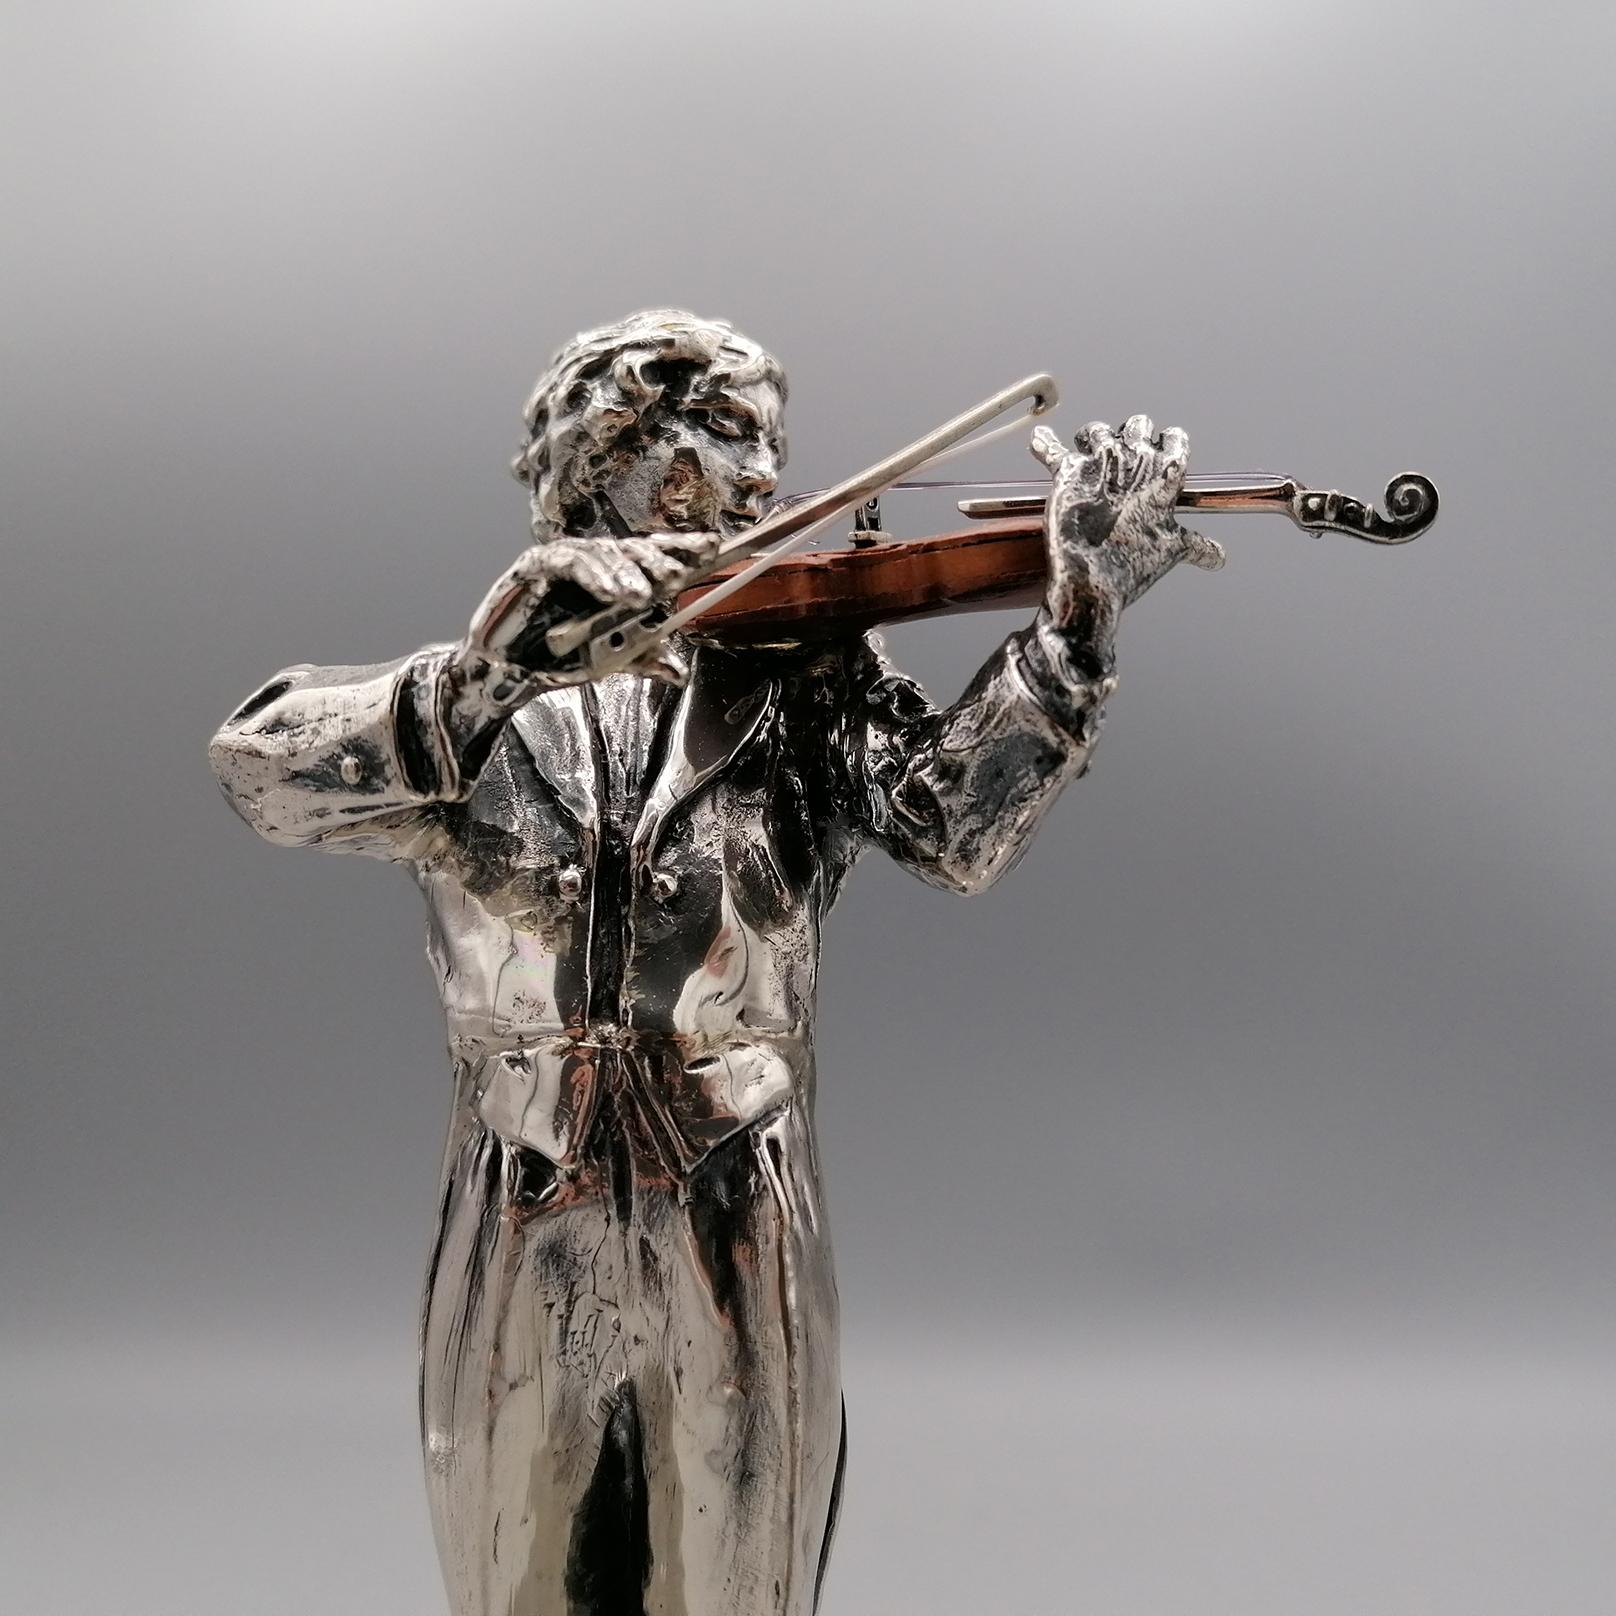 2oth Century Italian Solid Silver Violinist statue with wooden violin For Sale 4